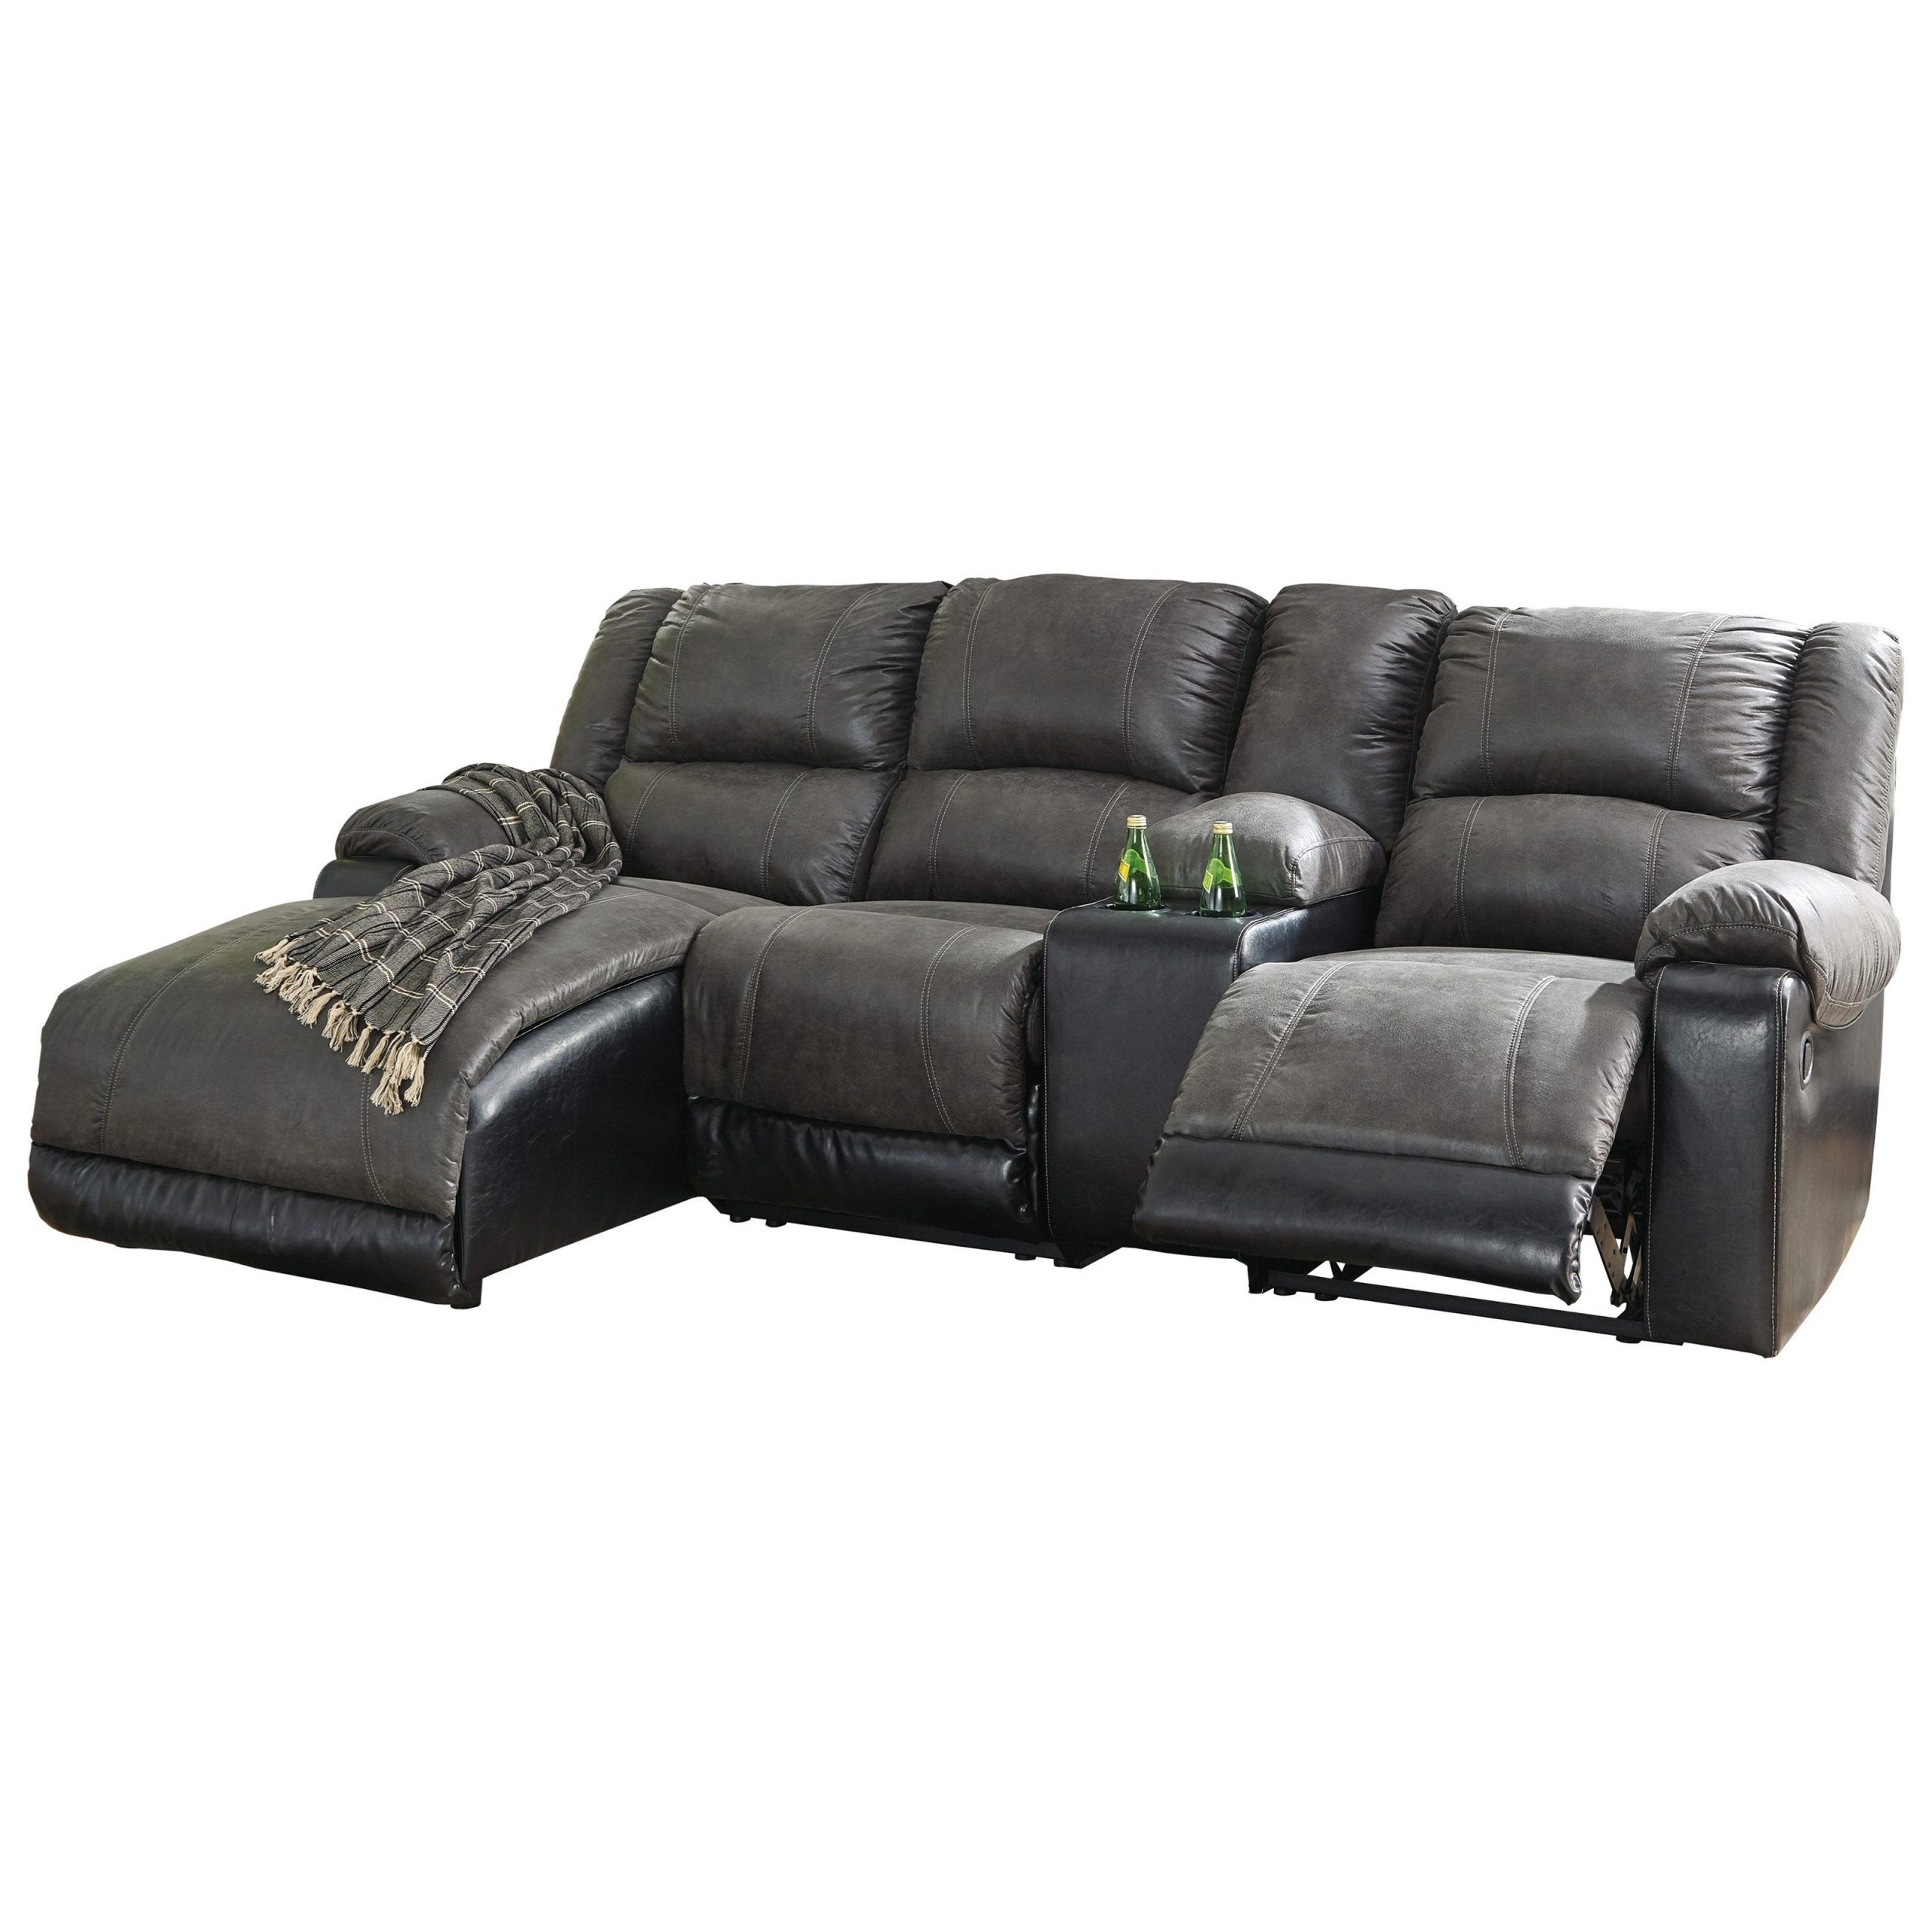 Well Liked Palisades Reclining Sectional Sofas With Left Storage Chaise With Signature Designashley Nantahala Reclining Chaise Sofa (View 22 of 25)